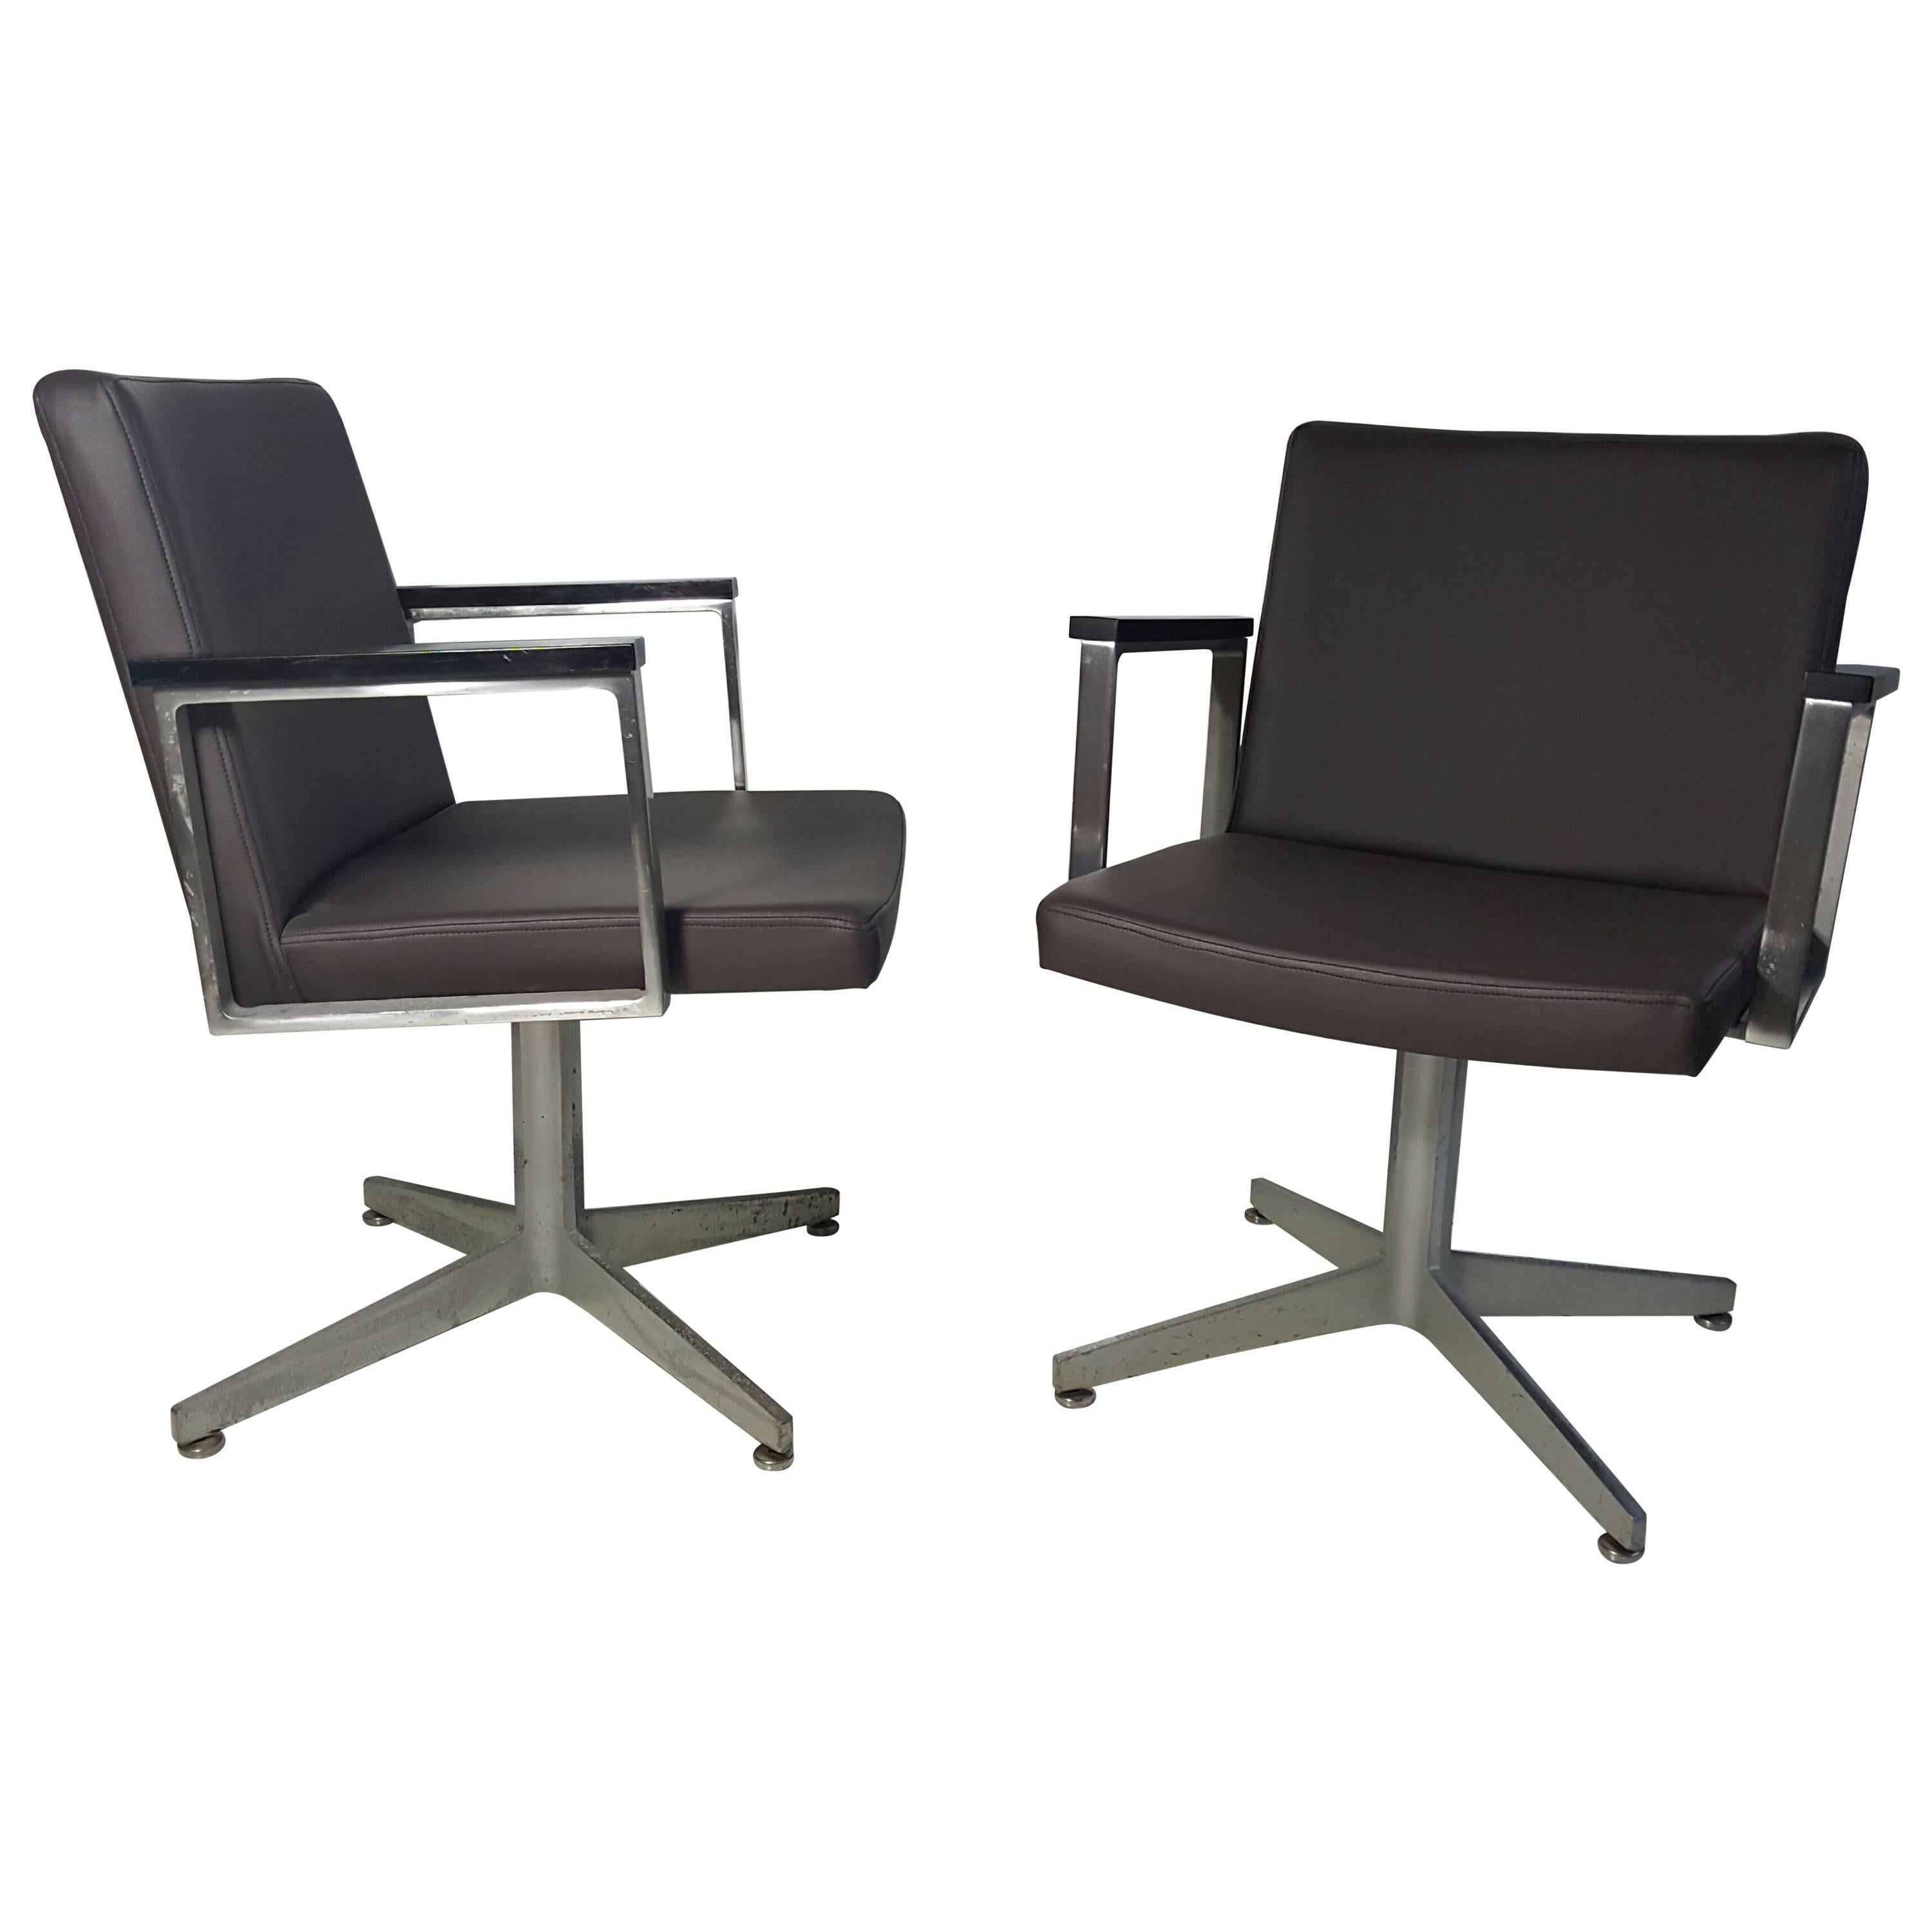 Aluminum and Leather Good Form Armchairs, Modernist, Machine Age